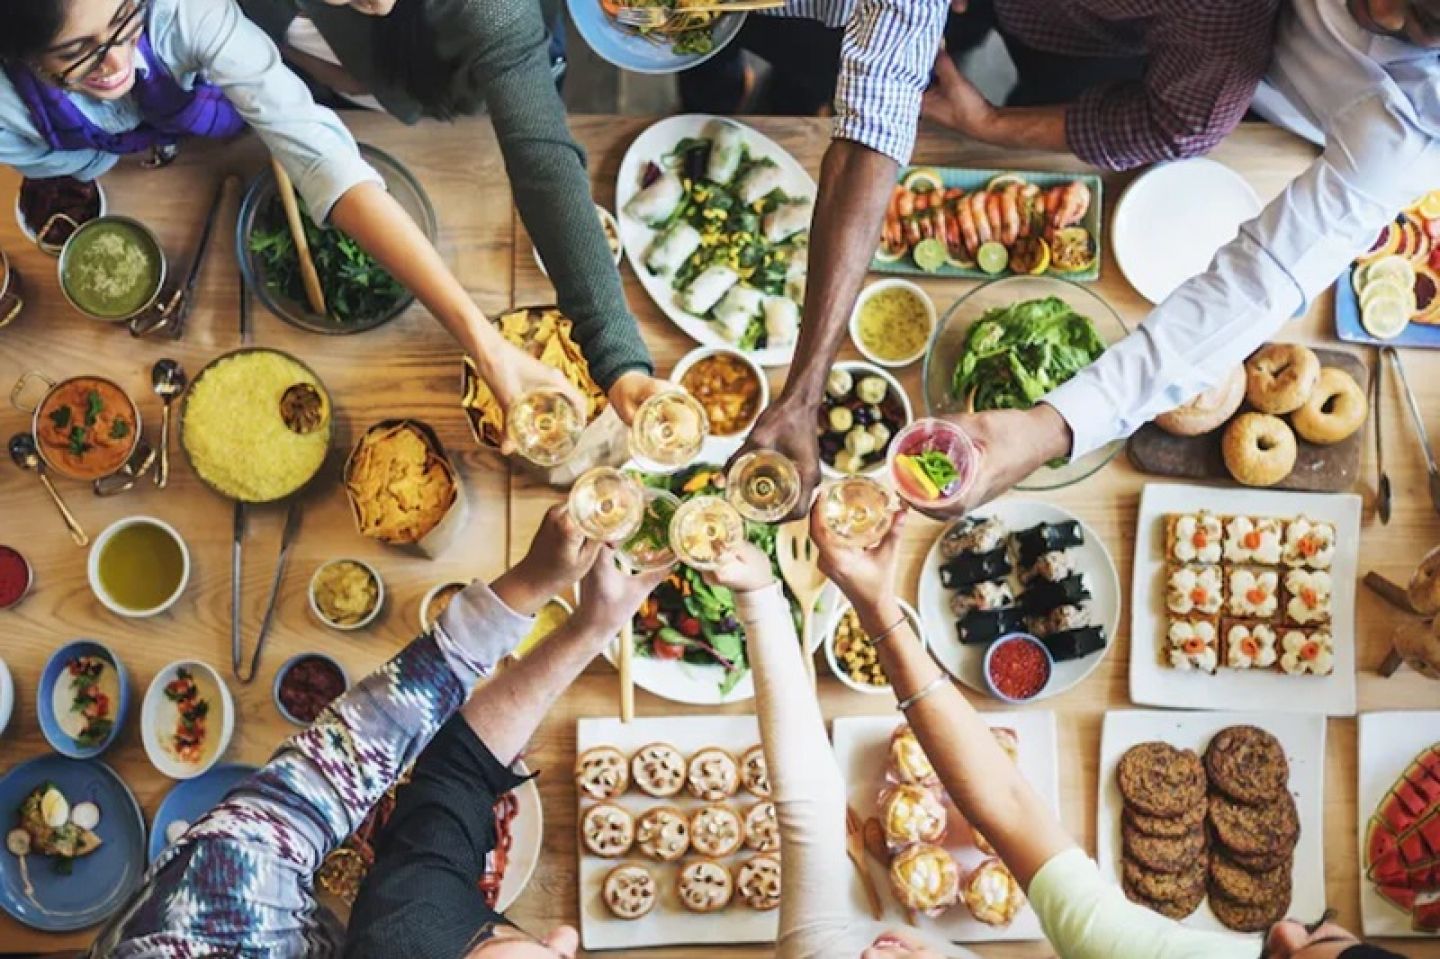 Overhead image of people joining glasses over a table full of food.